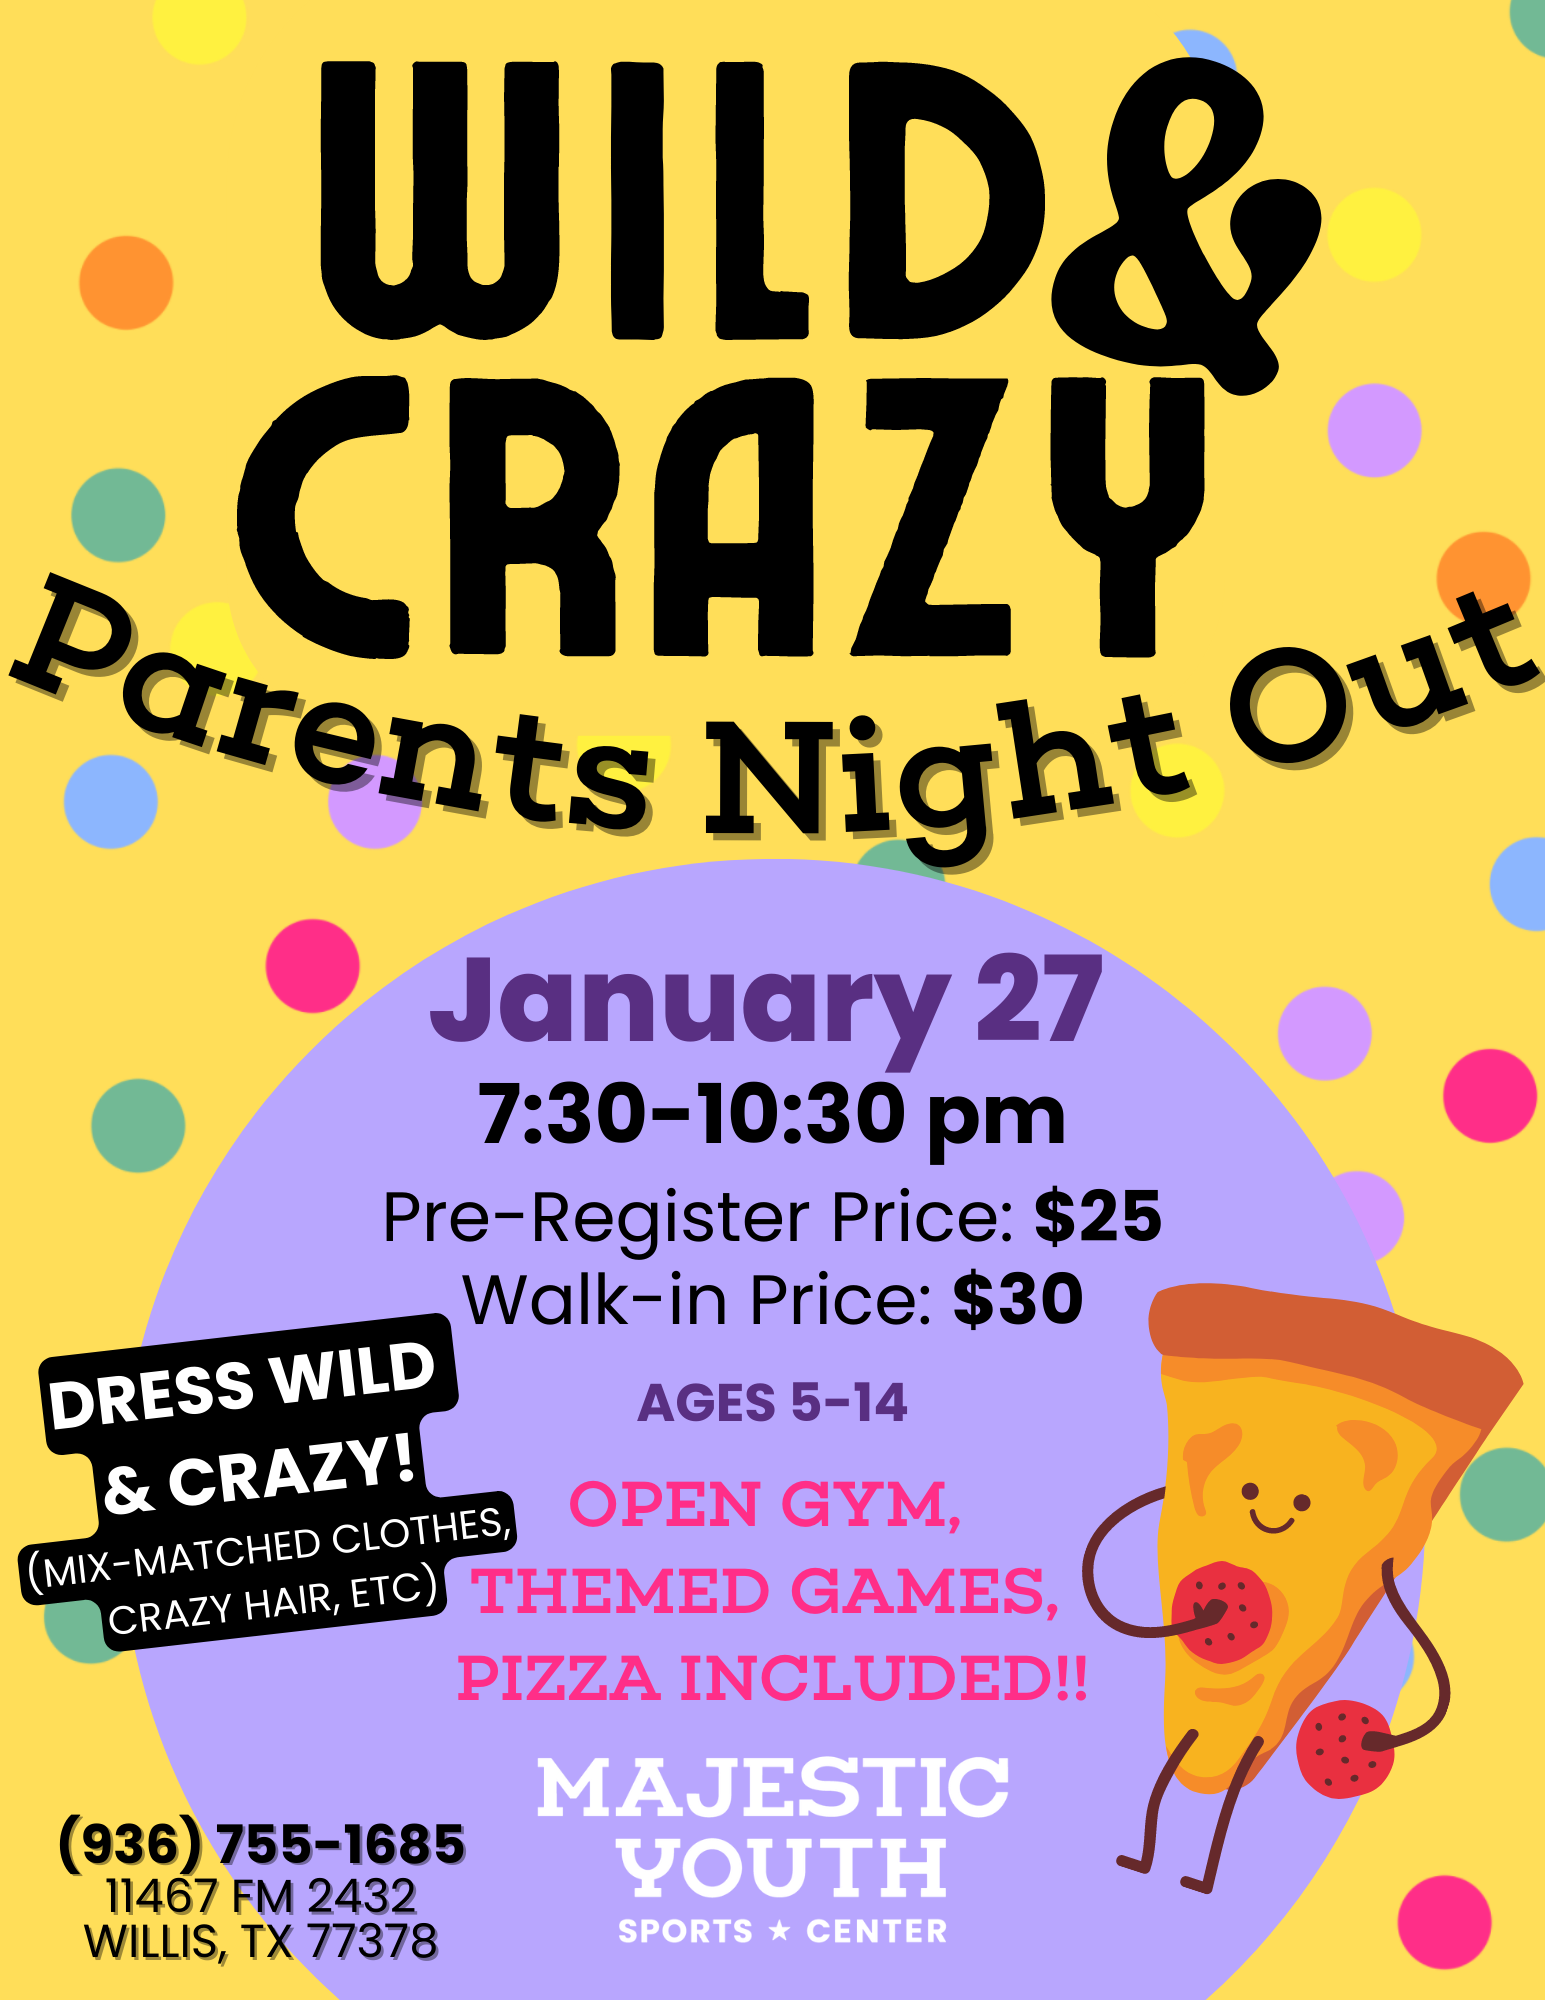 PAST EVENT - Are you looking for a night out on the town, but need a reliable and fun place for your children to stay? Look no further than the Majestic Youth Sports Center Parents Night Out event on January 27th!